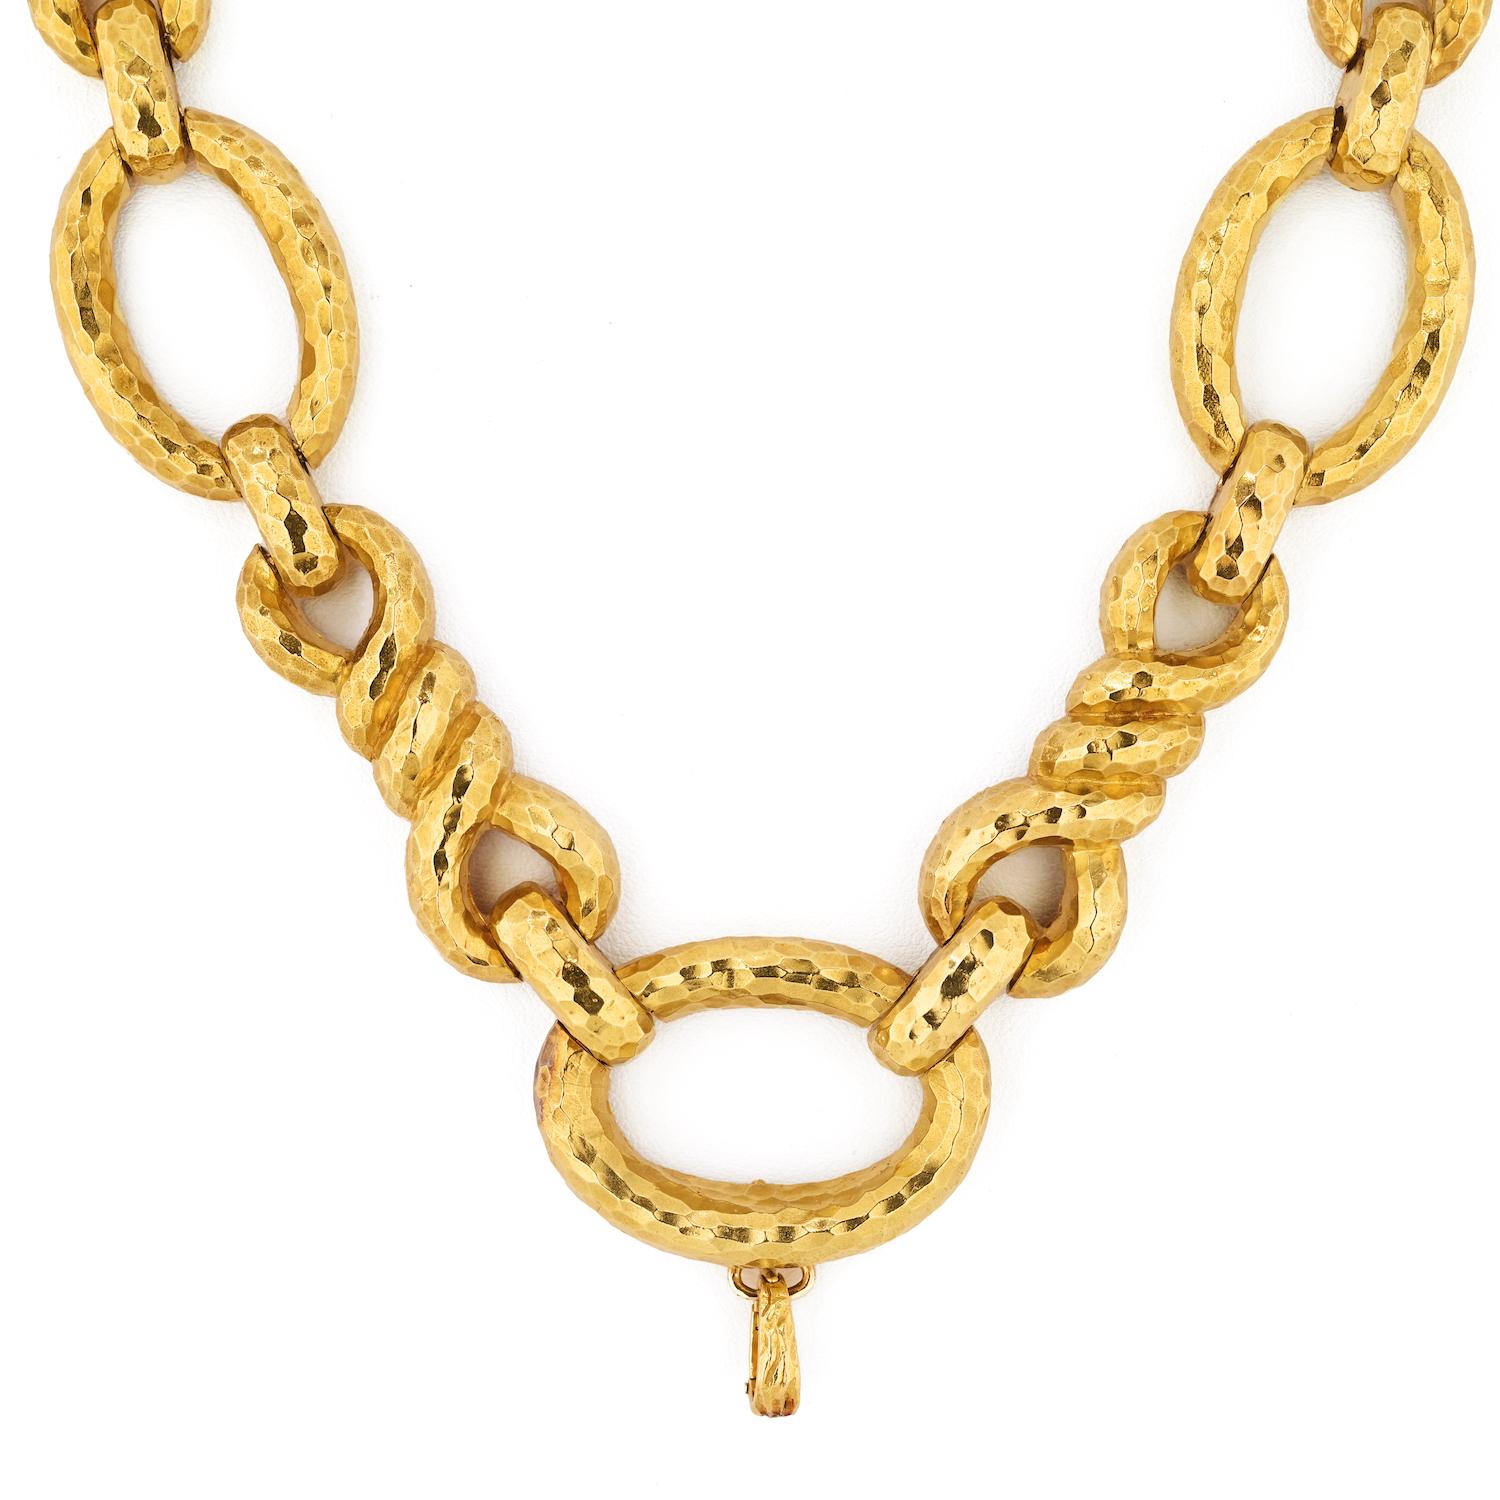 David Webb 18K Yellow Gold Open Link And Twist Links Necklace In Excellent Condition For Sale In New York, NY